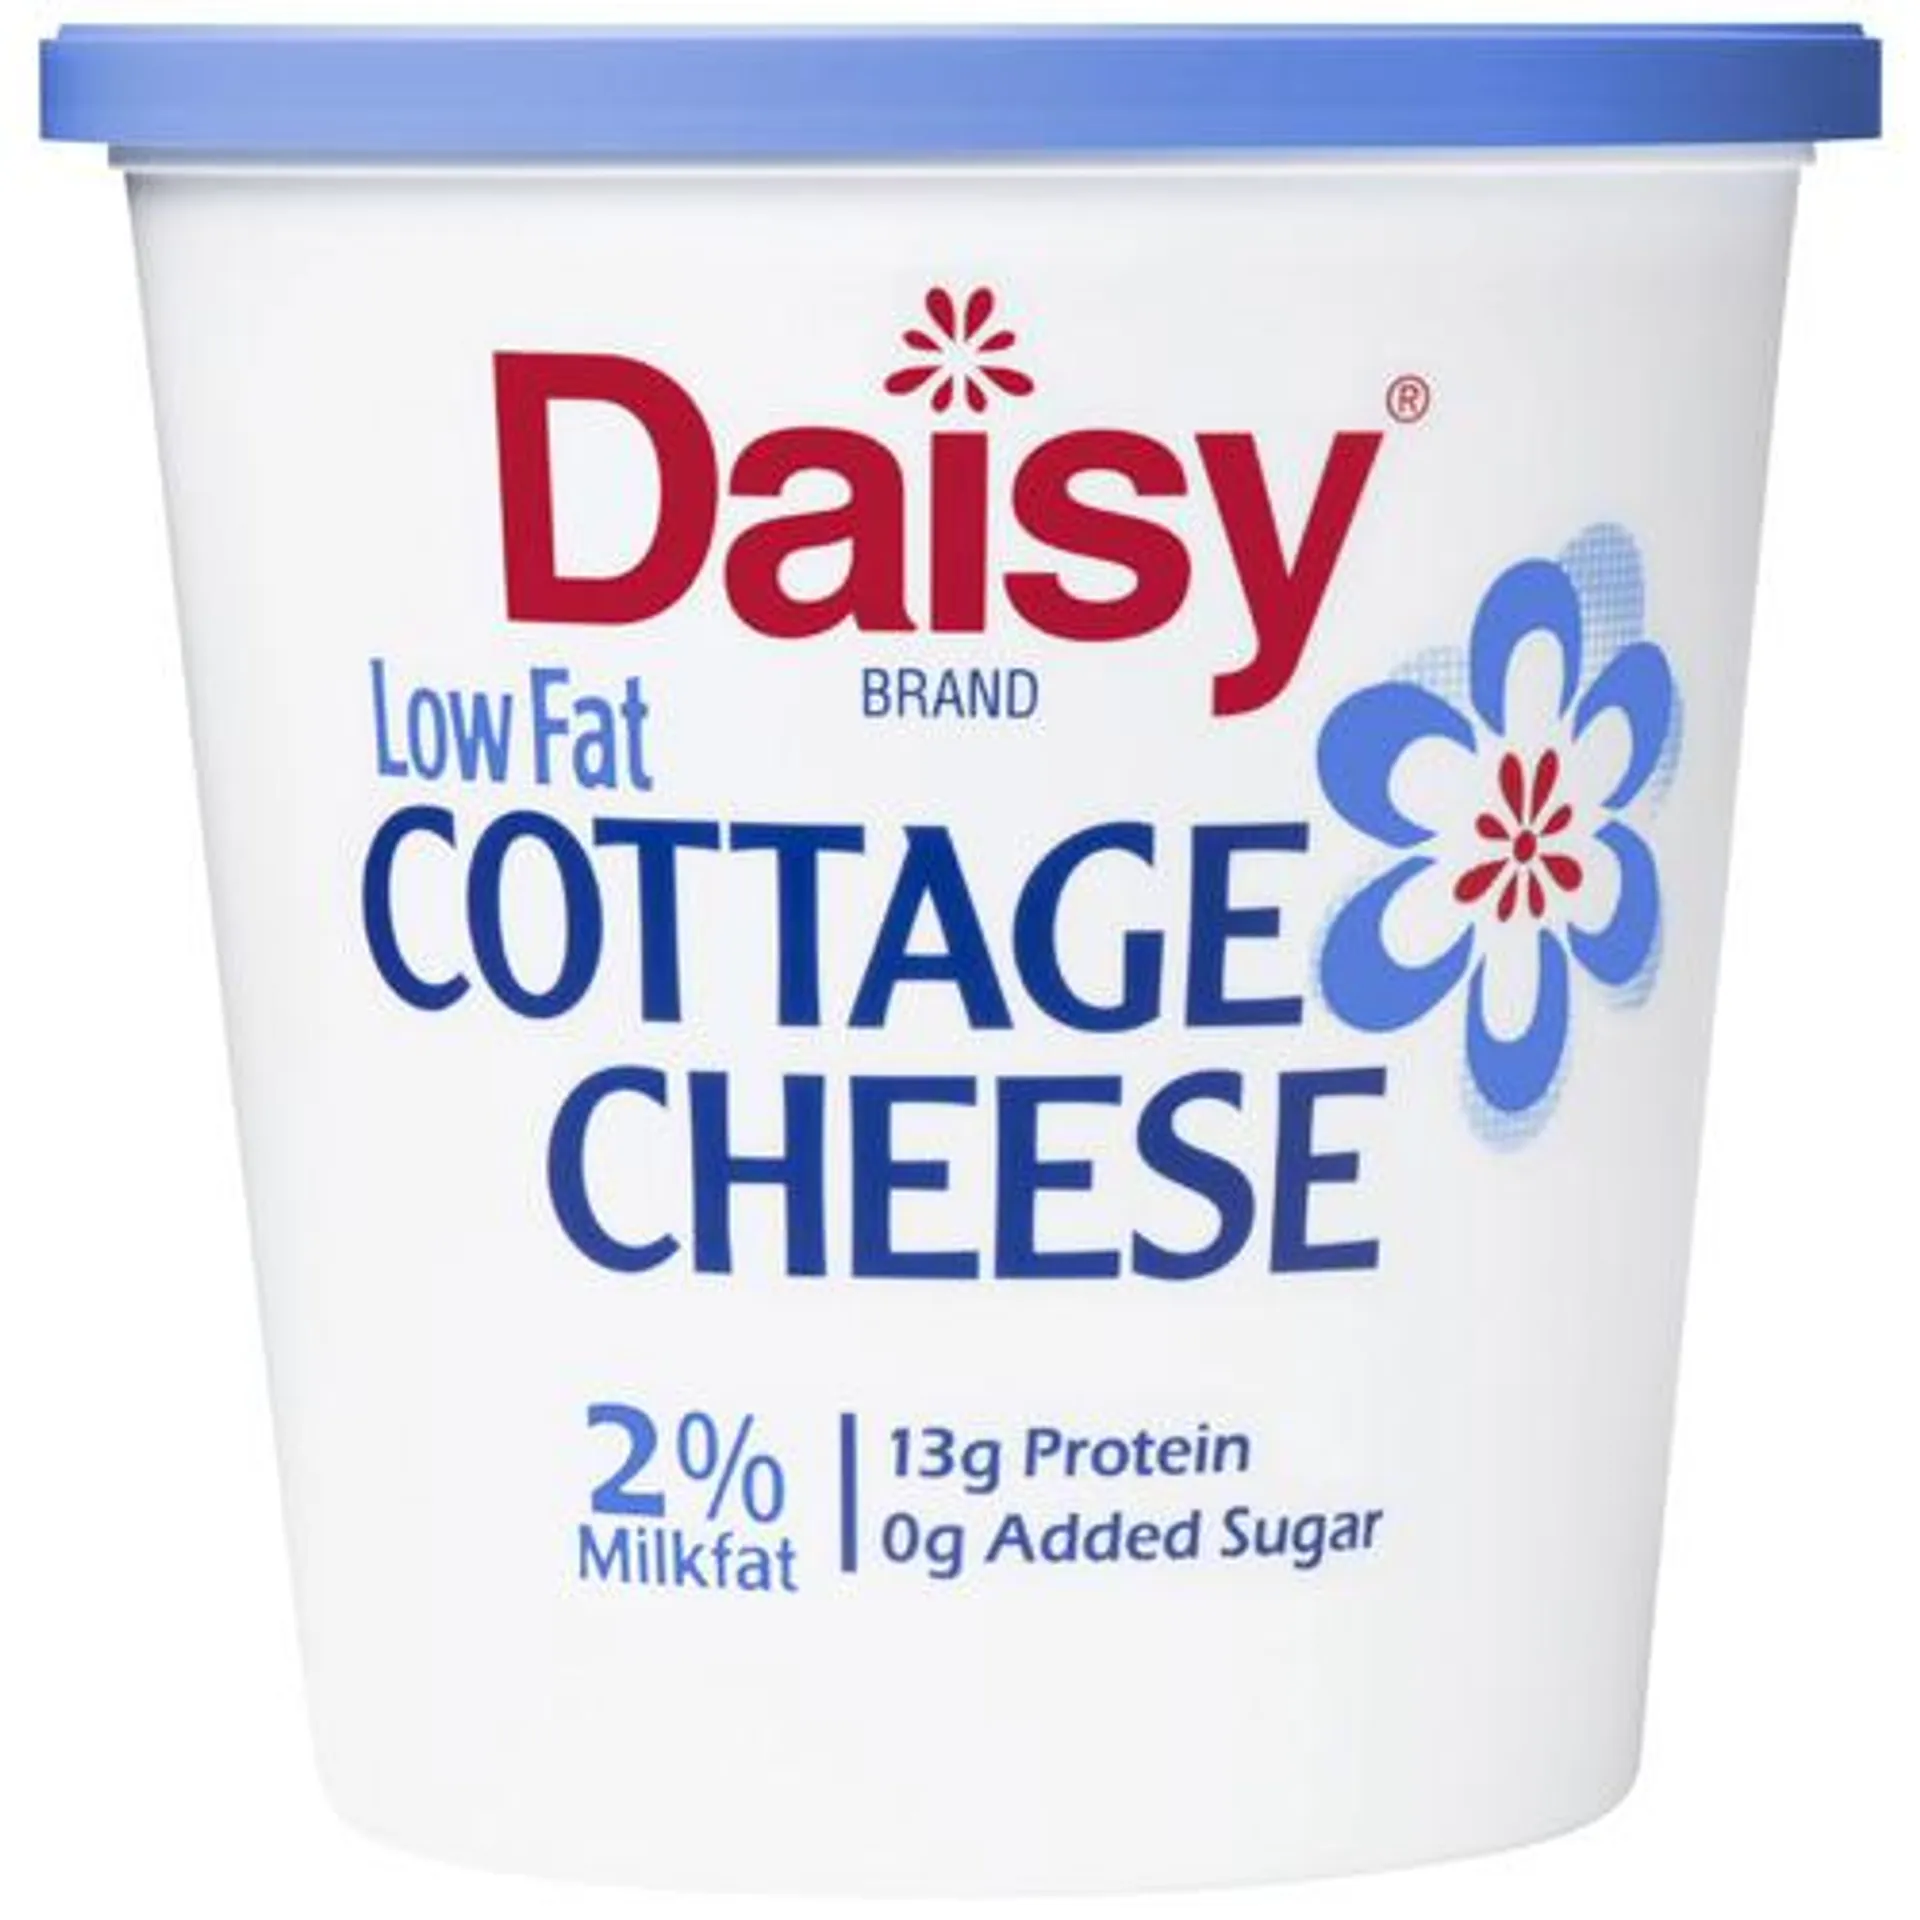 Daisy® cottage cheese 2%